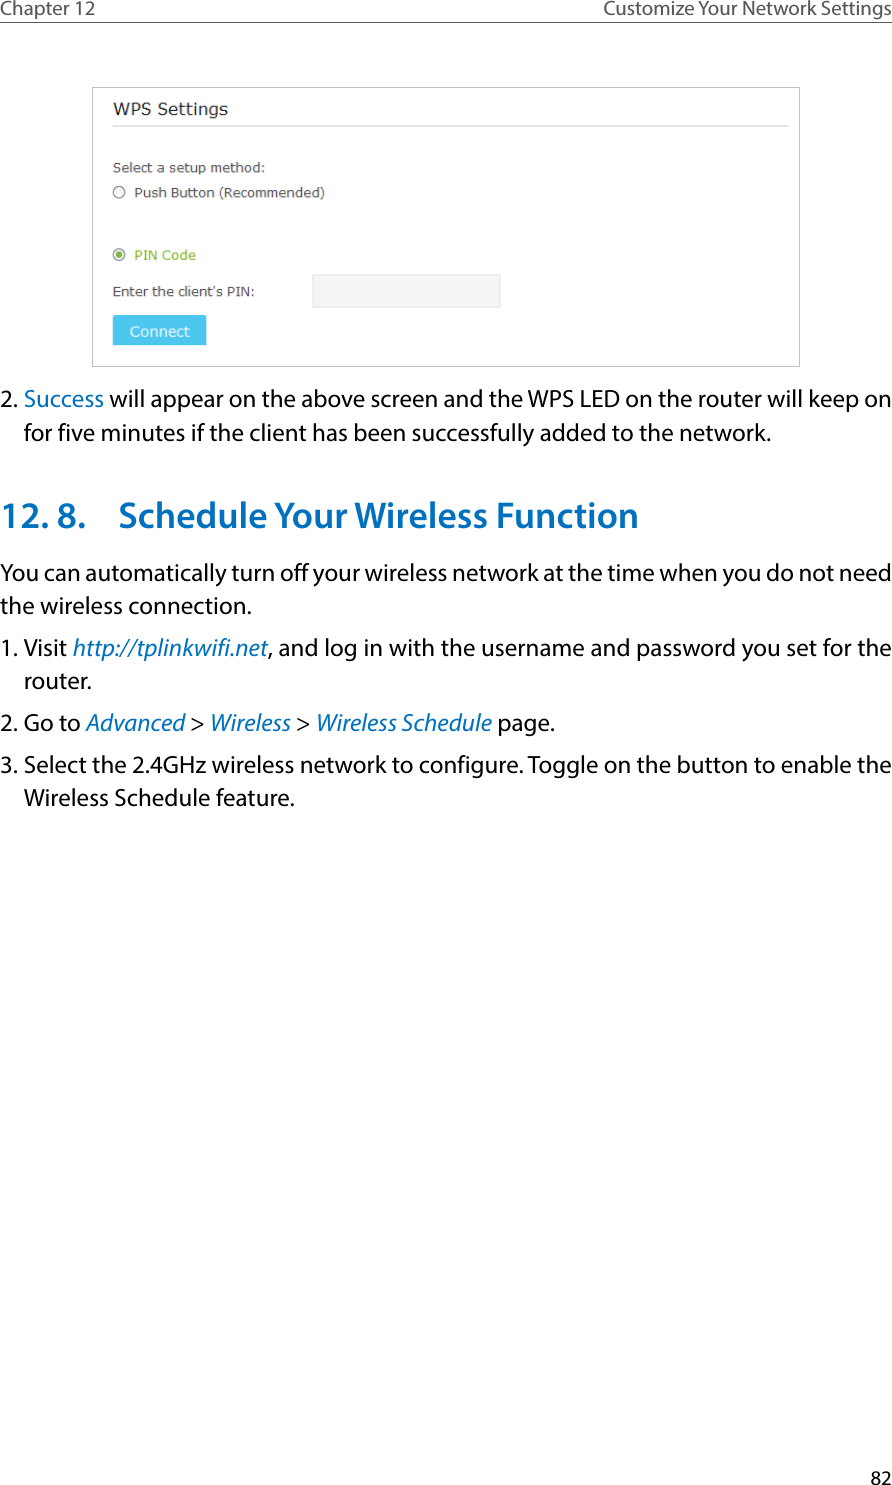 82Chapter 12 Customize Your Network Settings2. Success will appear on the above screen and the WPS LED on the router will keep on for five minutes if the client has been successfully added to the network.12. 8.  Schedule Your Wireless FunctionYou can automatically turn off your wireless network at the time when you do not need the wireless connection.1. Visit http://tplinkwifi.net, and log in with the username and password you set for the router.2. Go to Advanced &gt; Wireless &gt; Wireless Schedule page.3. Select the 2.4GHz wireless network to configure. Toggle on the button to enable the Wireless Schedule feature. 